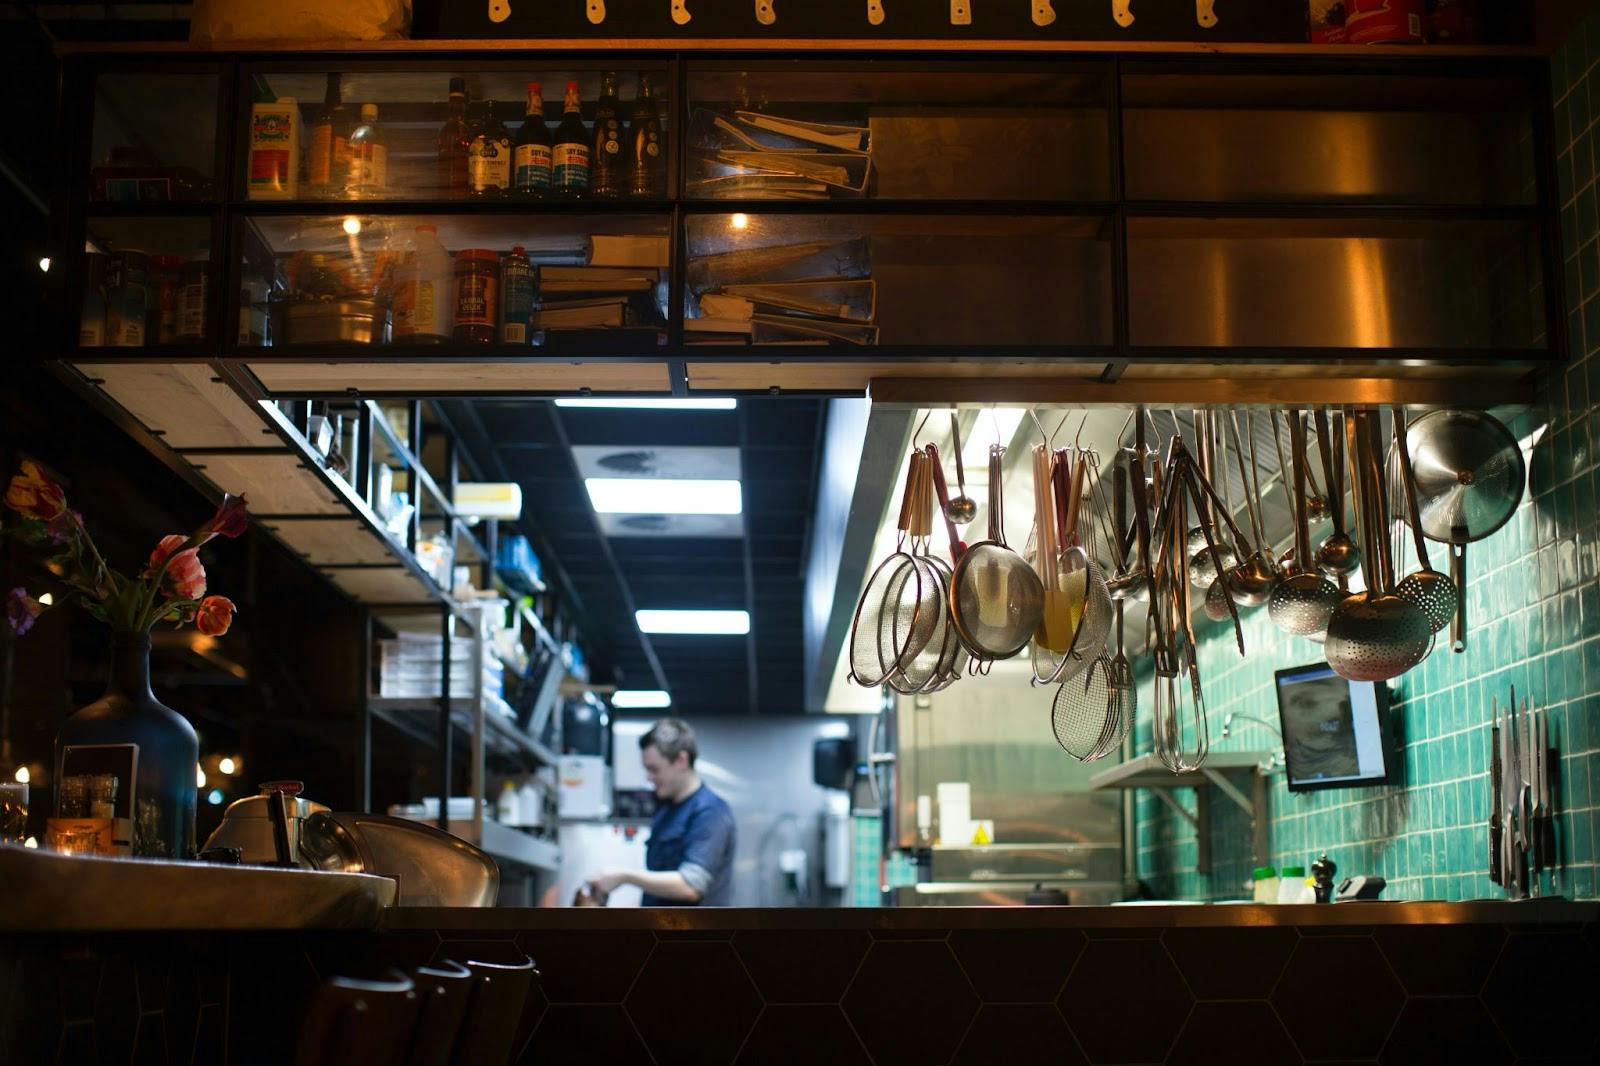 Image of kitchen equipment hanging over an open counter